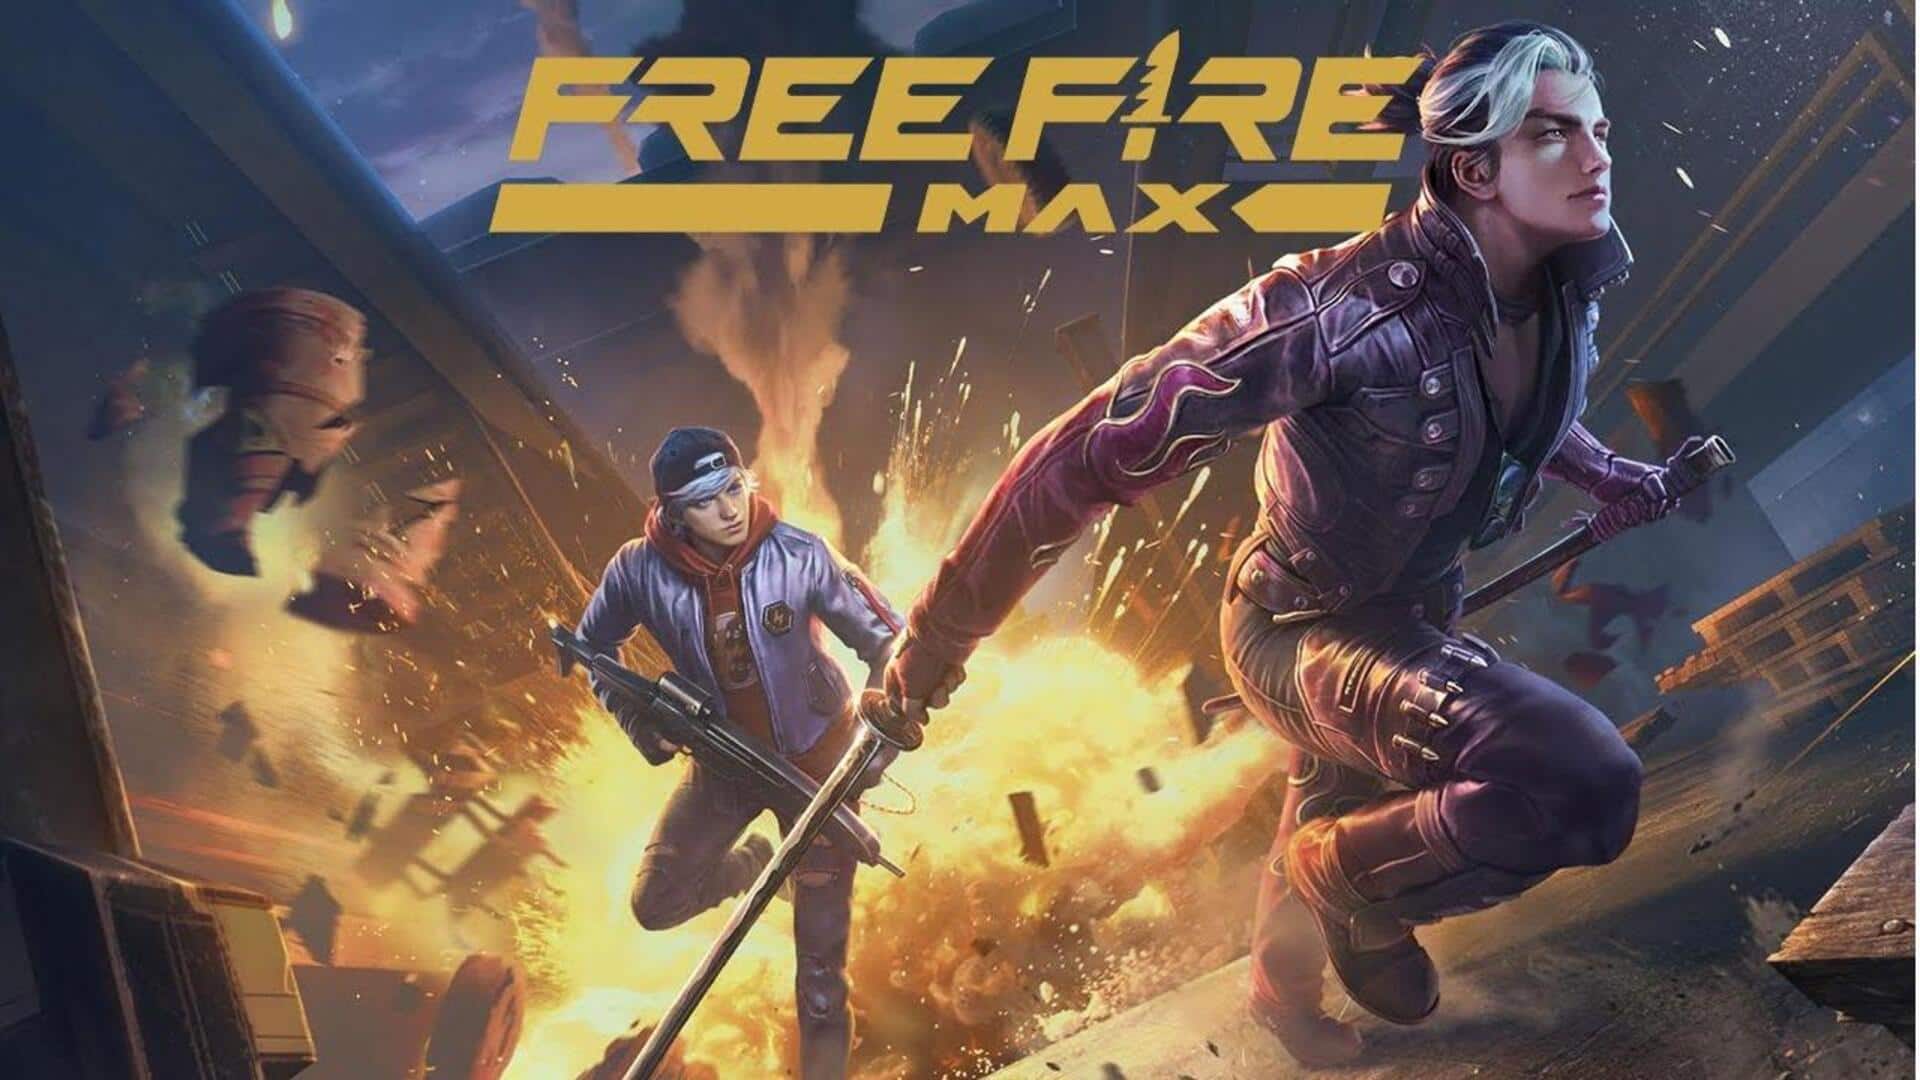 Garena Free Fire MAX's July 21 codes: How to redeem